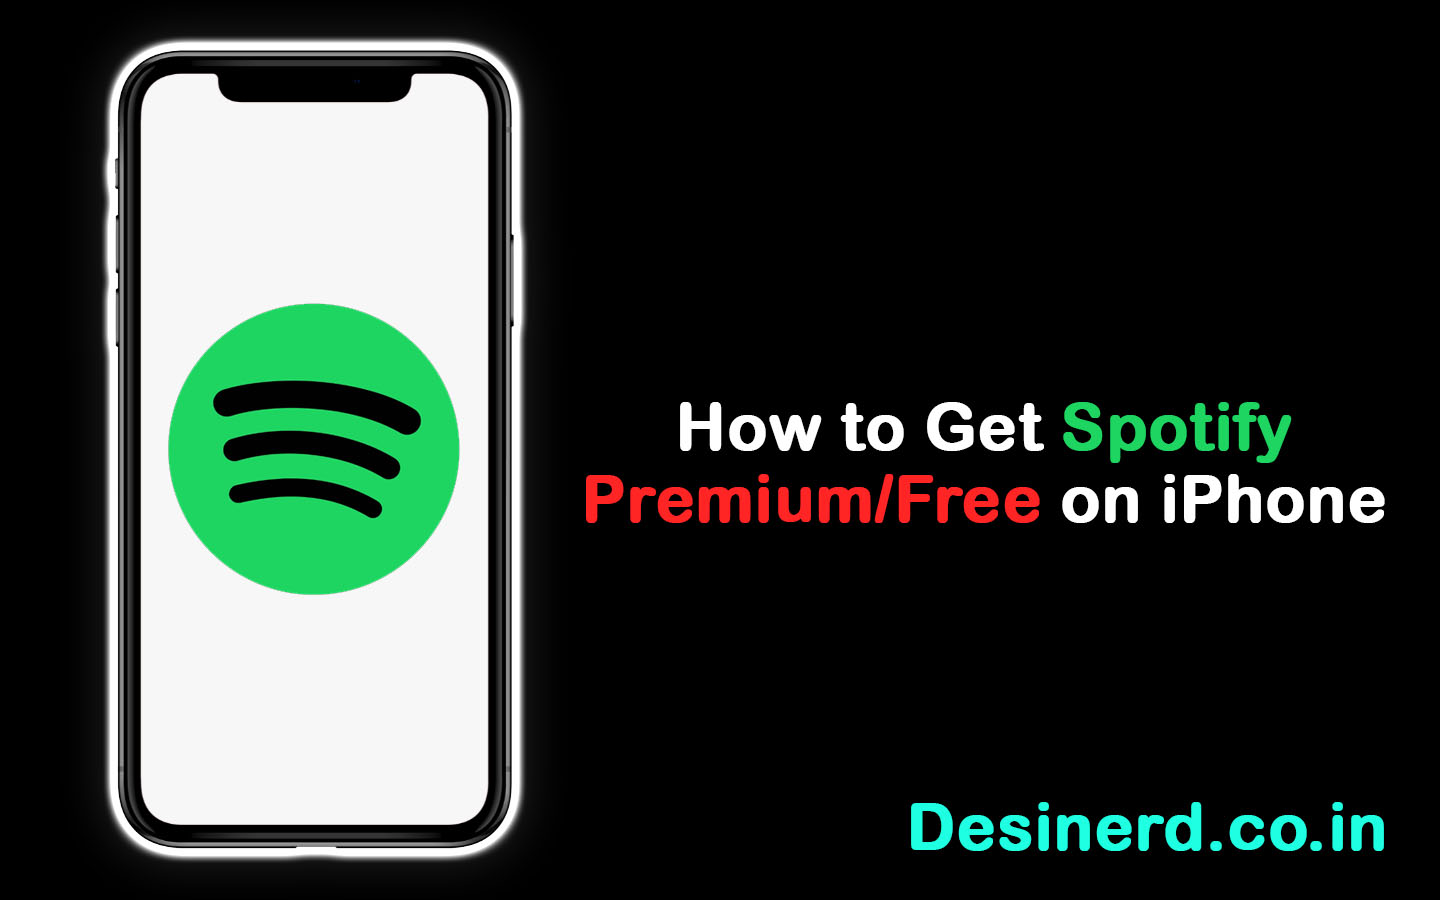 How to Get Spotify Premium/Free on iOS